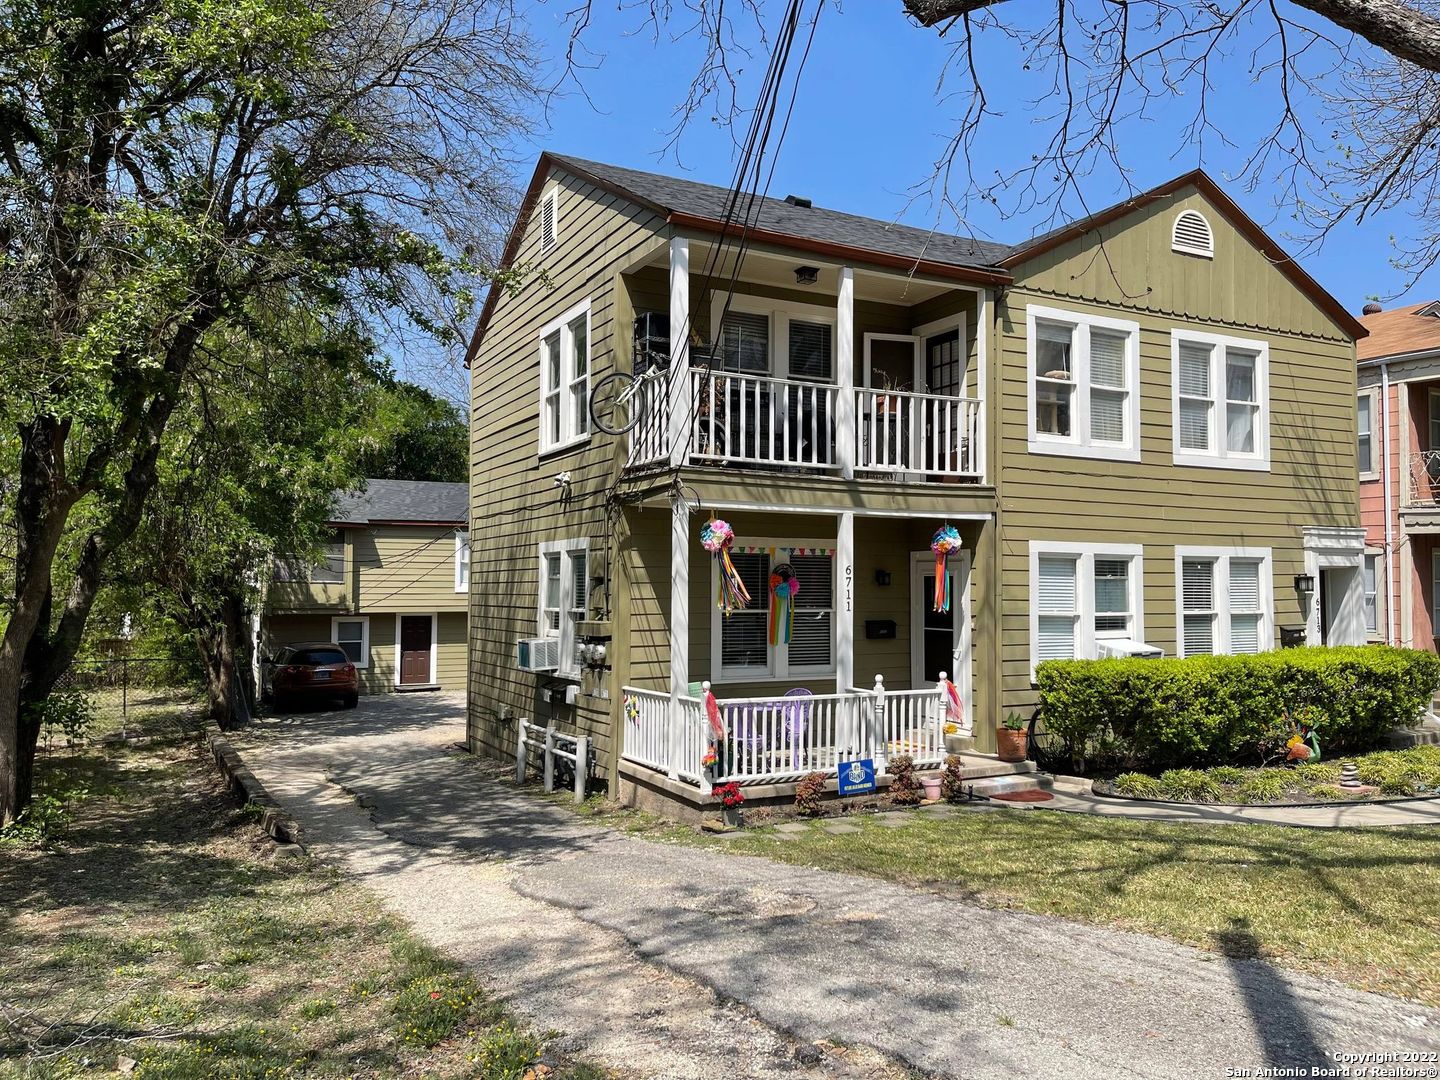 This beautifully maintained Fourplex, in the Heart of Alamo Heights, is being offered as an individual sale for an owner/user or Investor; or as part of a Portfolio with two other duplexes nearby at 228 W Norwood Ct and 506 W Lynwood Ave - for a total of 8 Amazing Units!  This property on Broadway, built in 1935, is surrounded by gorgeous oak trees and has so much charm! The front units are both One Bedroom and One Bath units, that were built in 1935 and have been beautifully renovated and updated. They also feature a front porch and balcony for outdoor enjoyment. There are also two units in the back; an efficiency unit downstairs and a One Bedroom unit upstairs with a balcony.  There is an additional Laundry Room in back for tenant convenience. Property has upside potential and would also make a wonderful Buy/Hold or 1031 Exchange purchase.